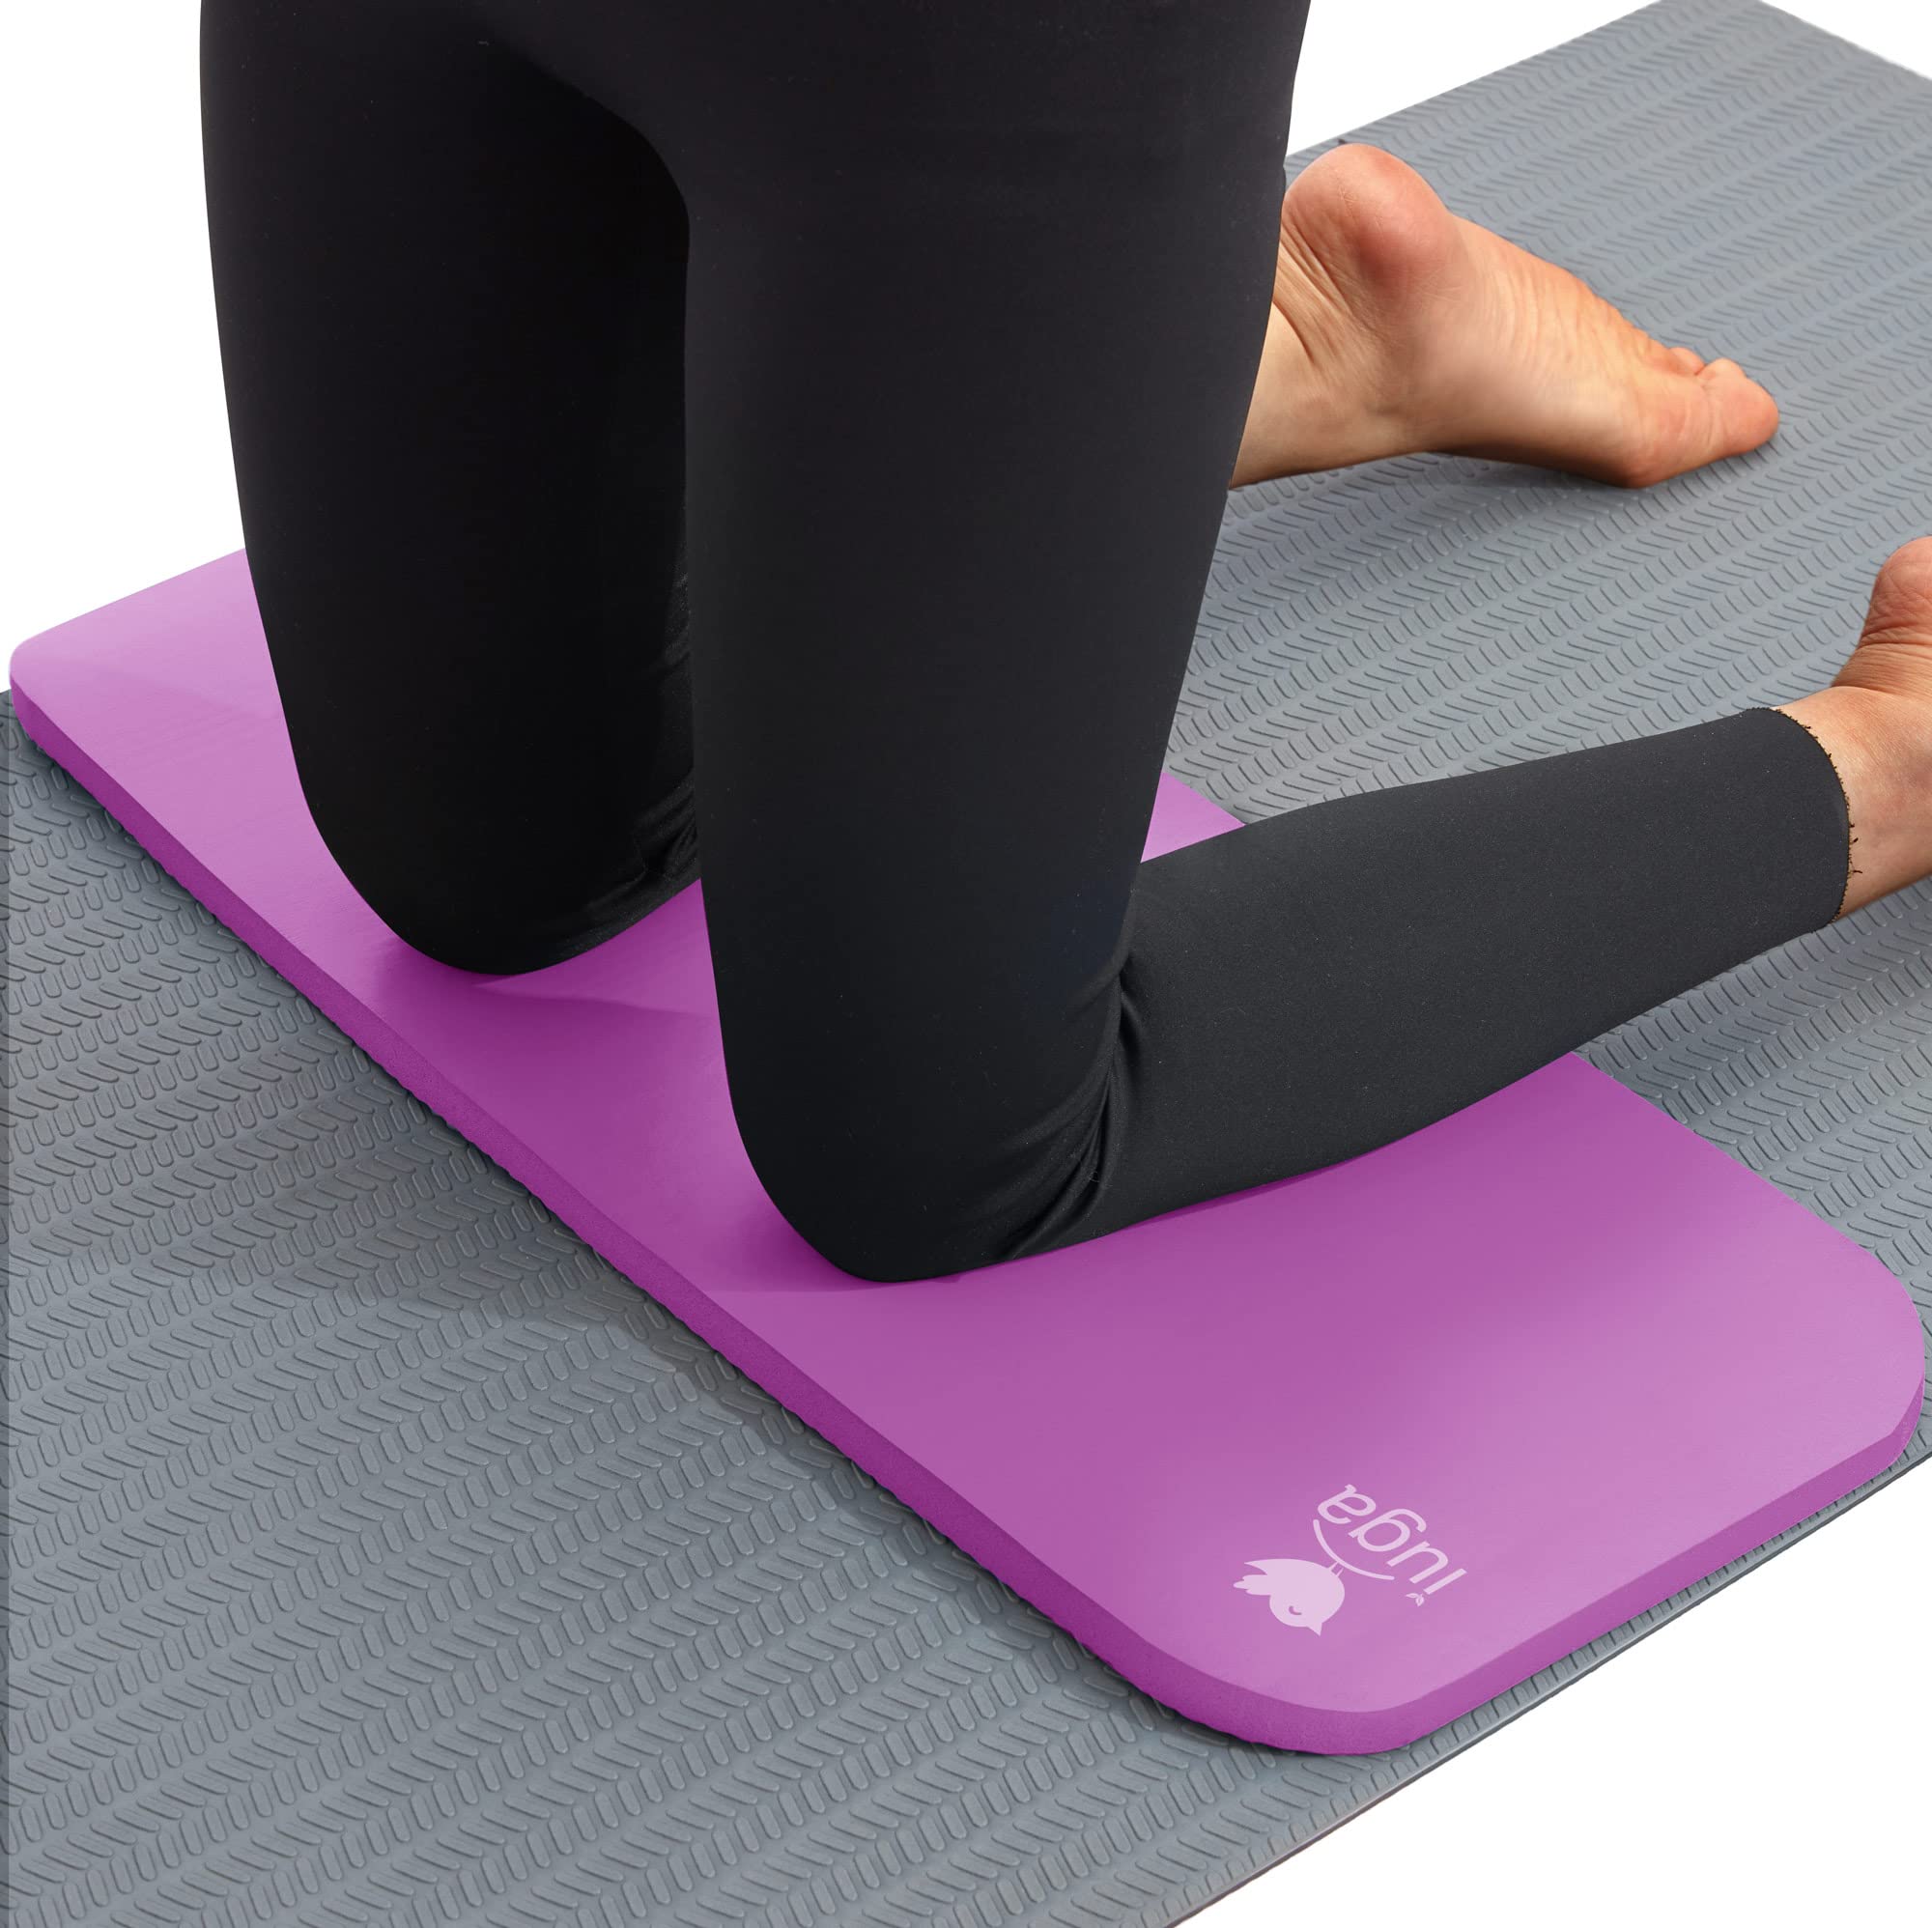 IUGA Yoga Knee Pads Cushion Non-Slip Knee Mat for Elbows Wrist Pain in Yoga  Planks Floor Exercises Portable Extra-thick Cushioning 24''x9''x0.6'' Purple